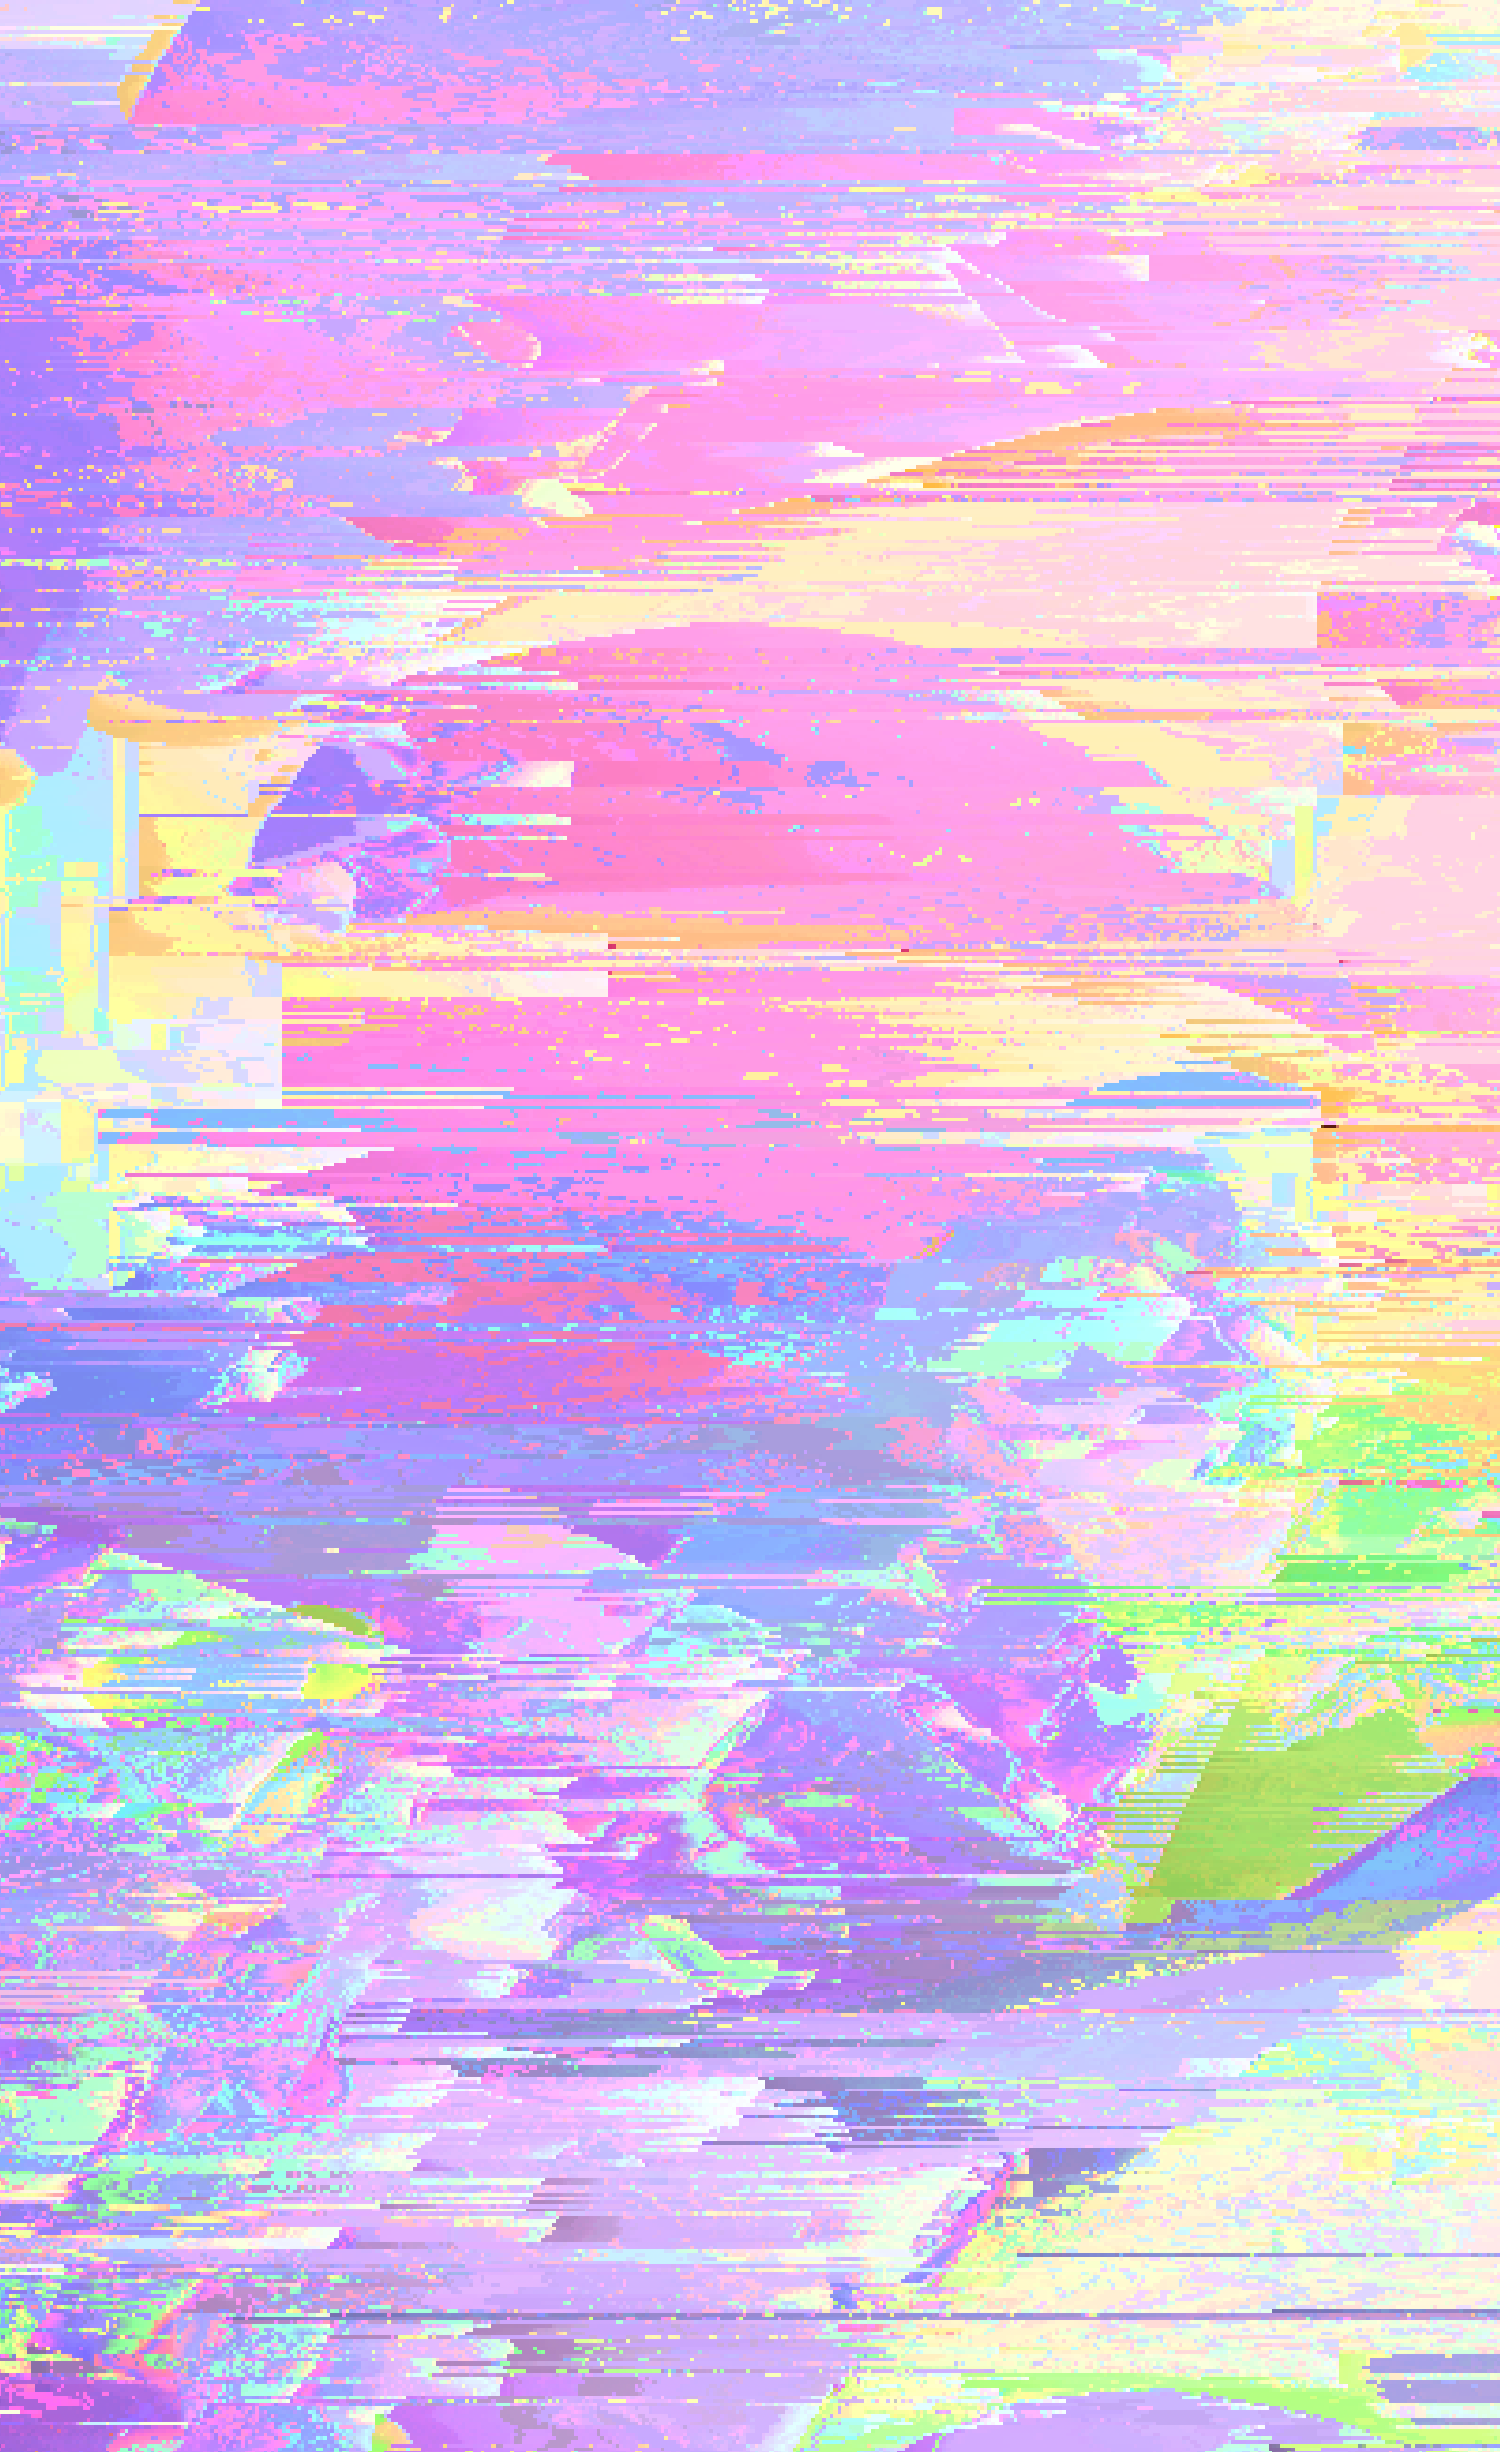 Glitch art created by pixel sorting. A neon pink half circle is surrounded by abstract iridescent shapes. It resembles a setting sun over a turbulent, colorful horizon.